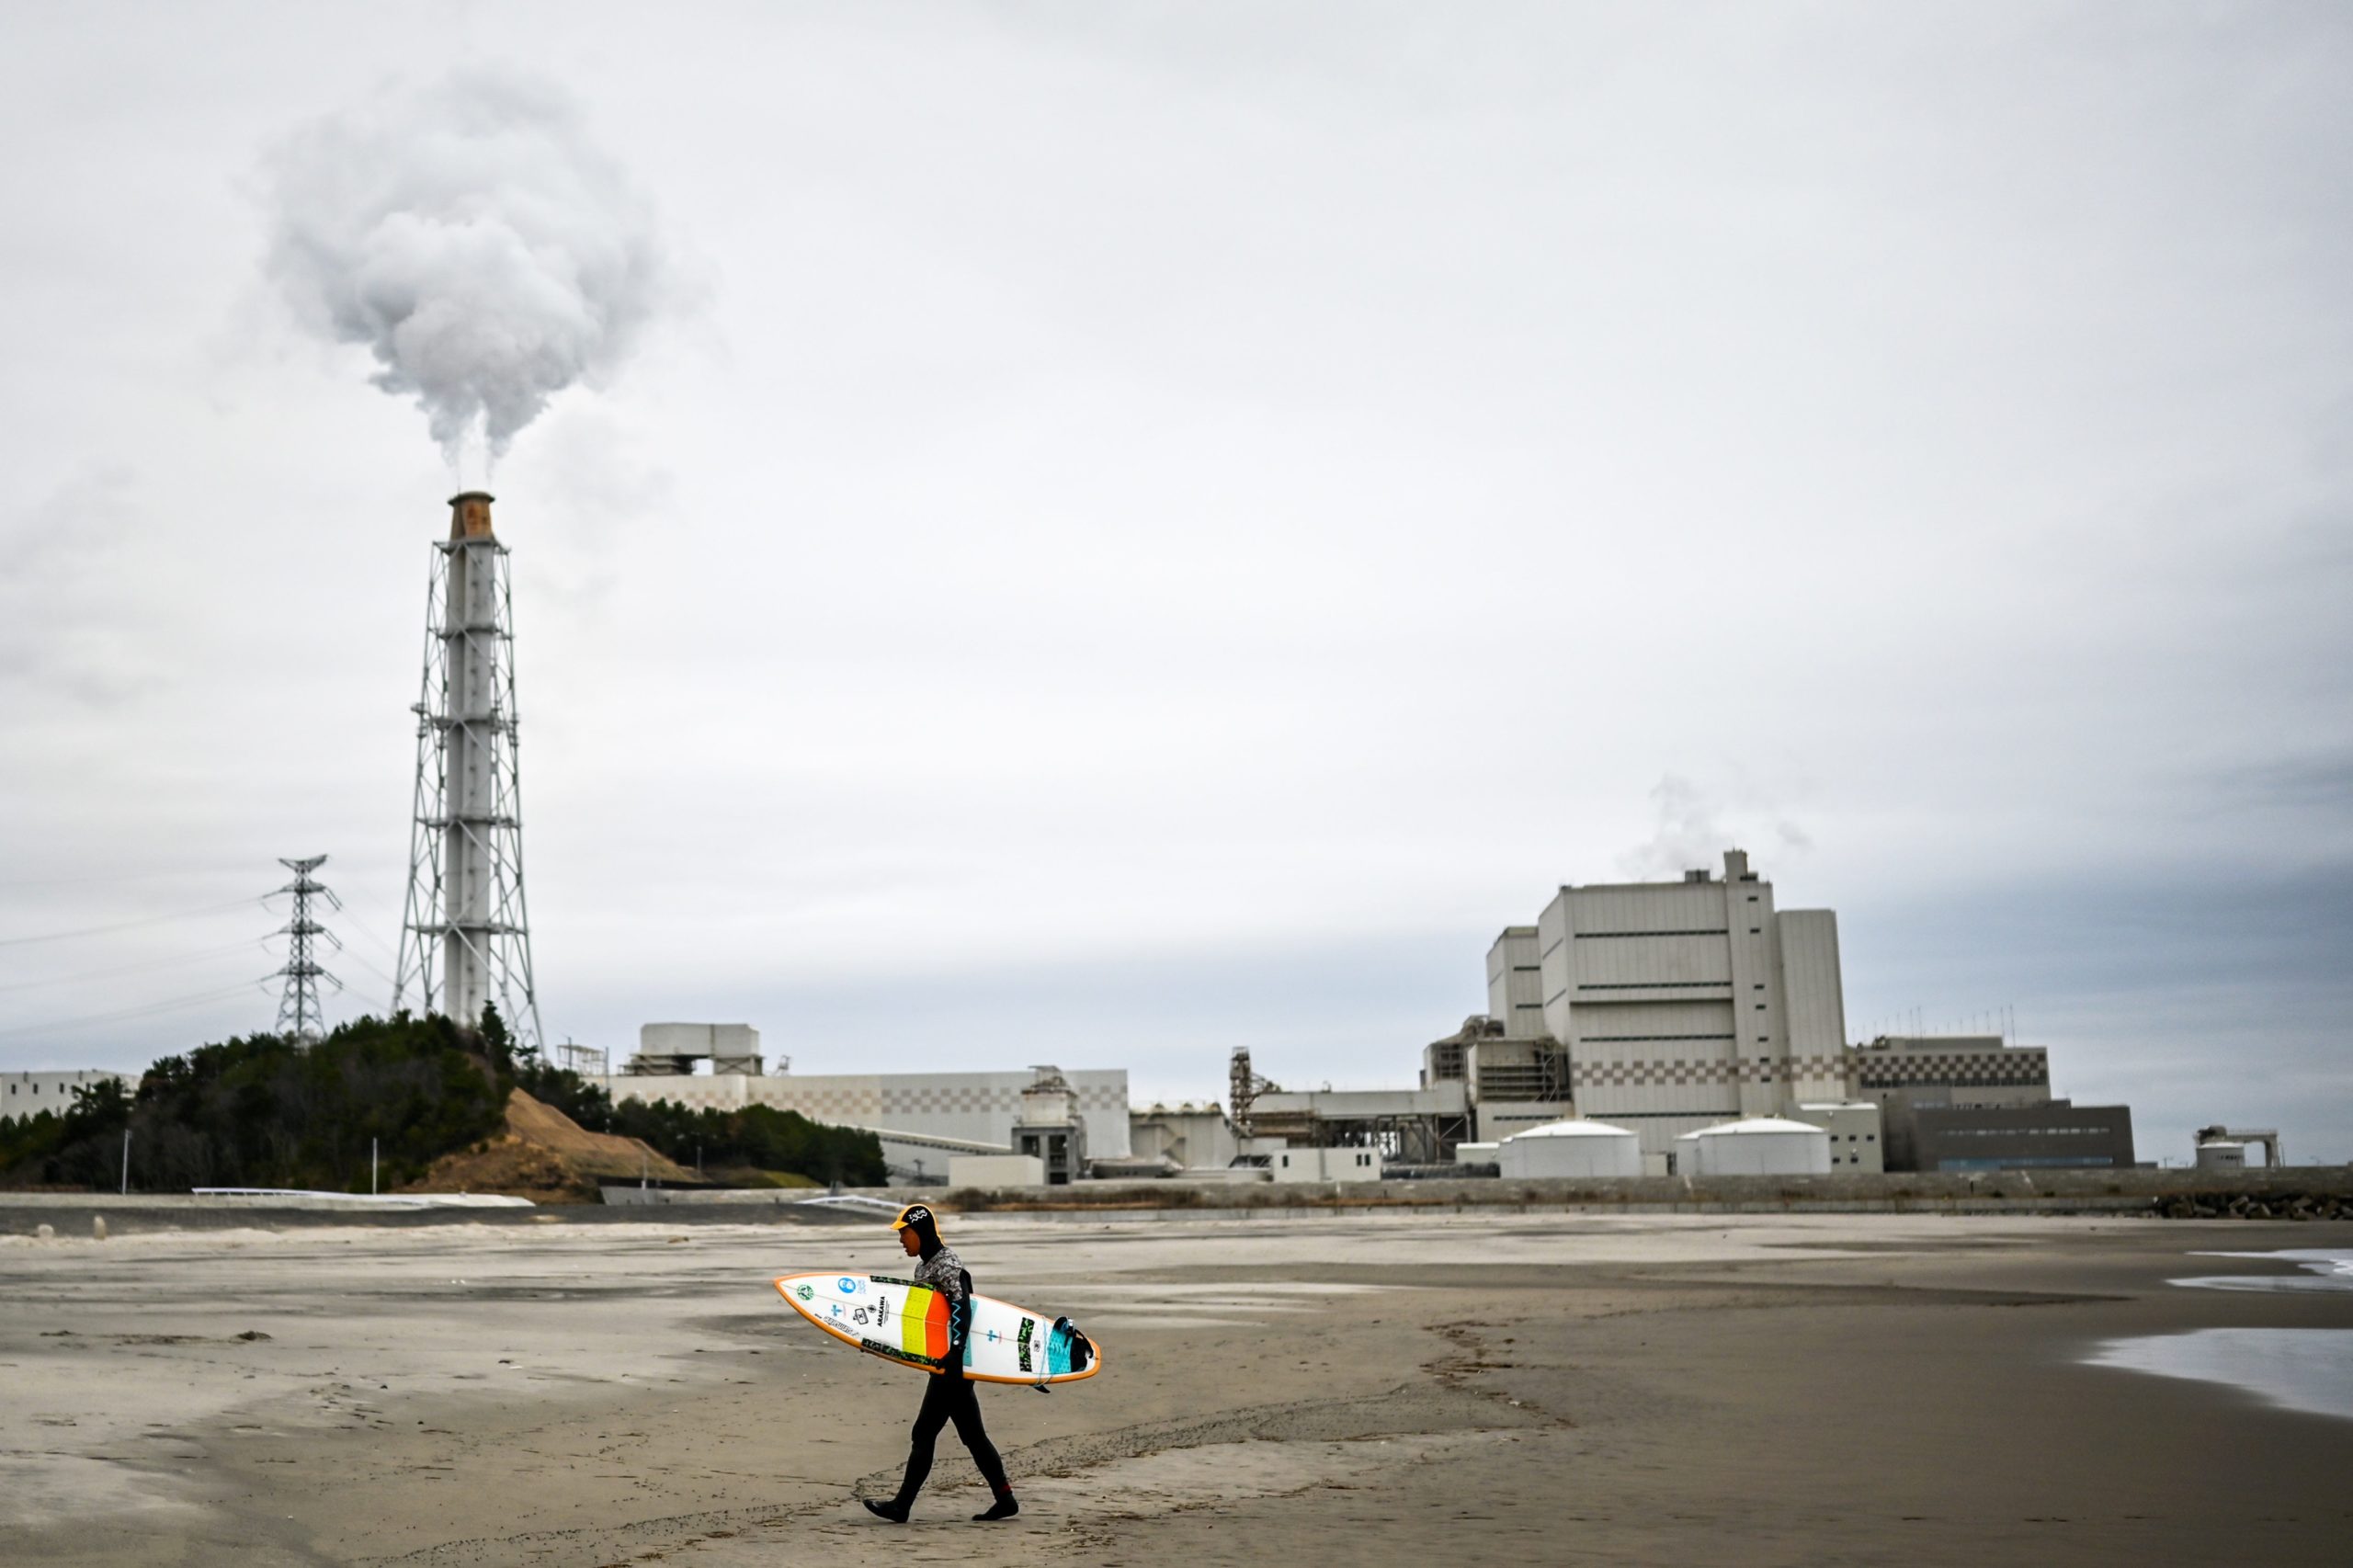 Koji Suzuki, a surfer and a surf shop owner, walking on the beach in front of a thermal power station after a surfing session in Minamisoma, Fukushima prefecture. (Photo: Charly Triballeau/AFP, Getty Images)